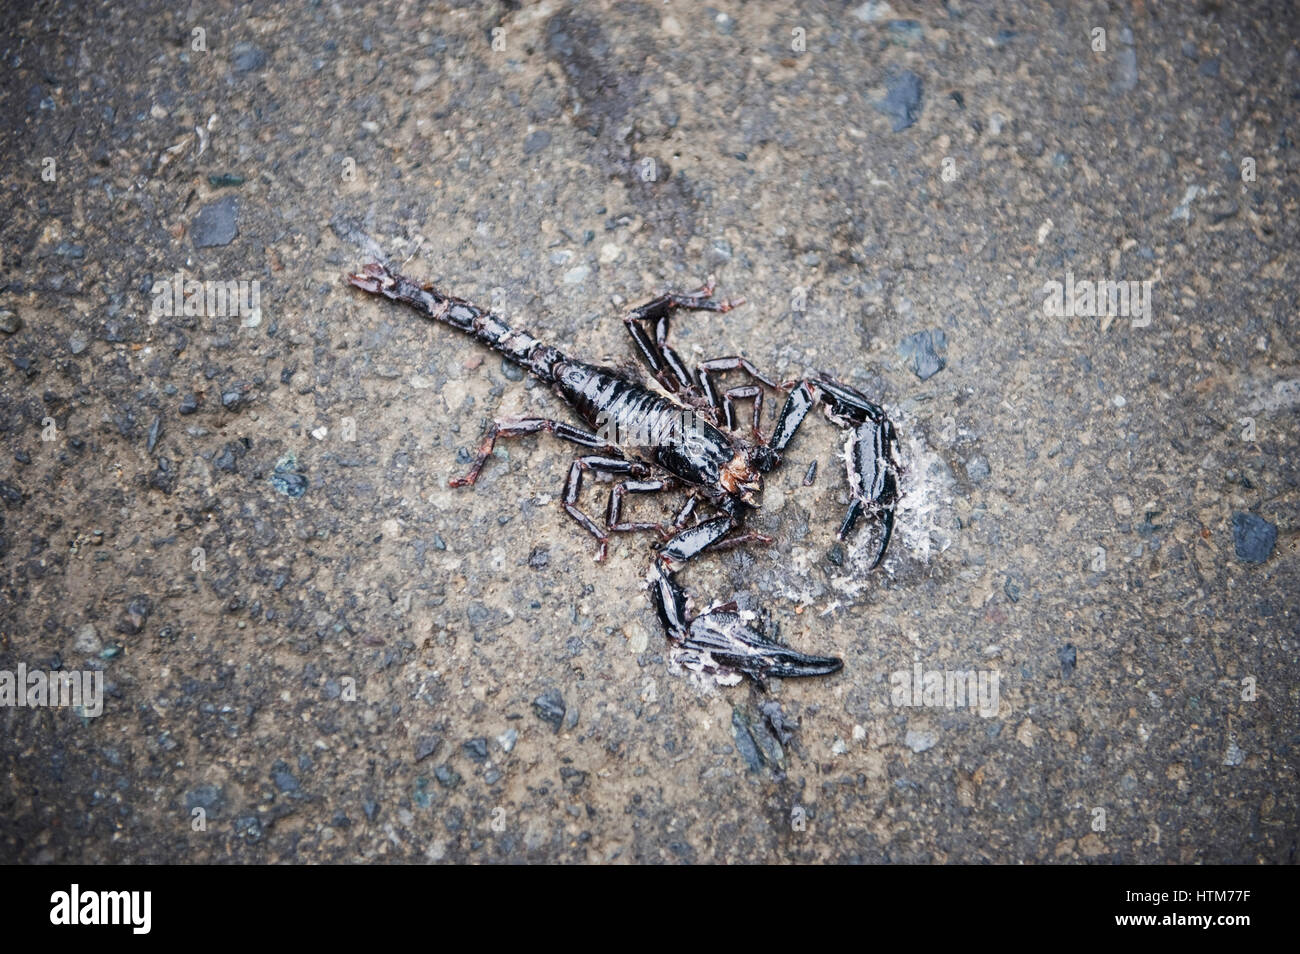 A dead scorpion in Sepilok. The Sepilok Orang Utan Rehabilitation Centre is located in Sabah, East Malaysia. The centre opened in 1964 and the orphane. Stock Photo